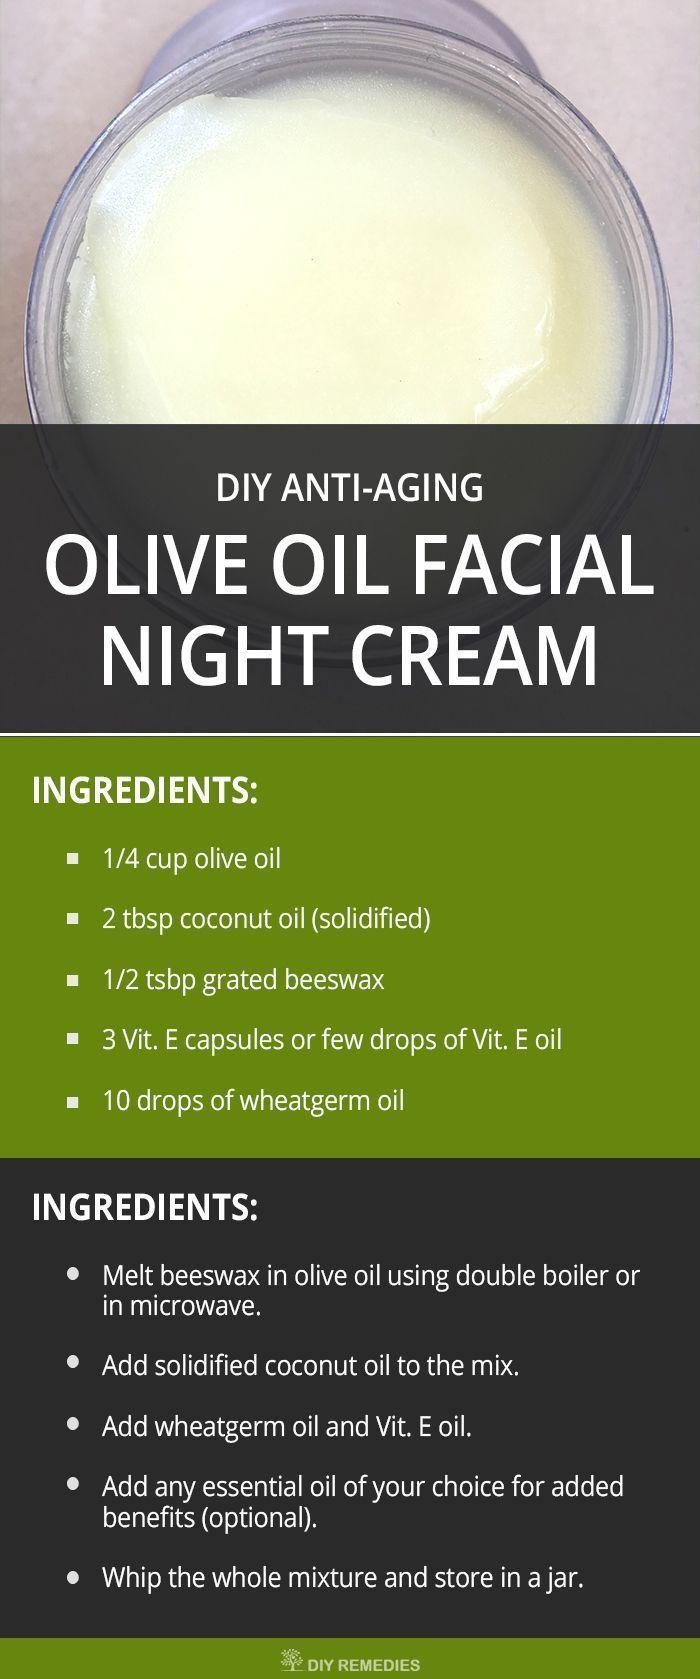 Olive oil facial products